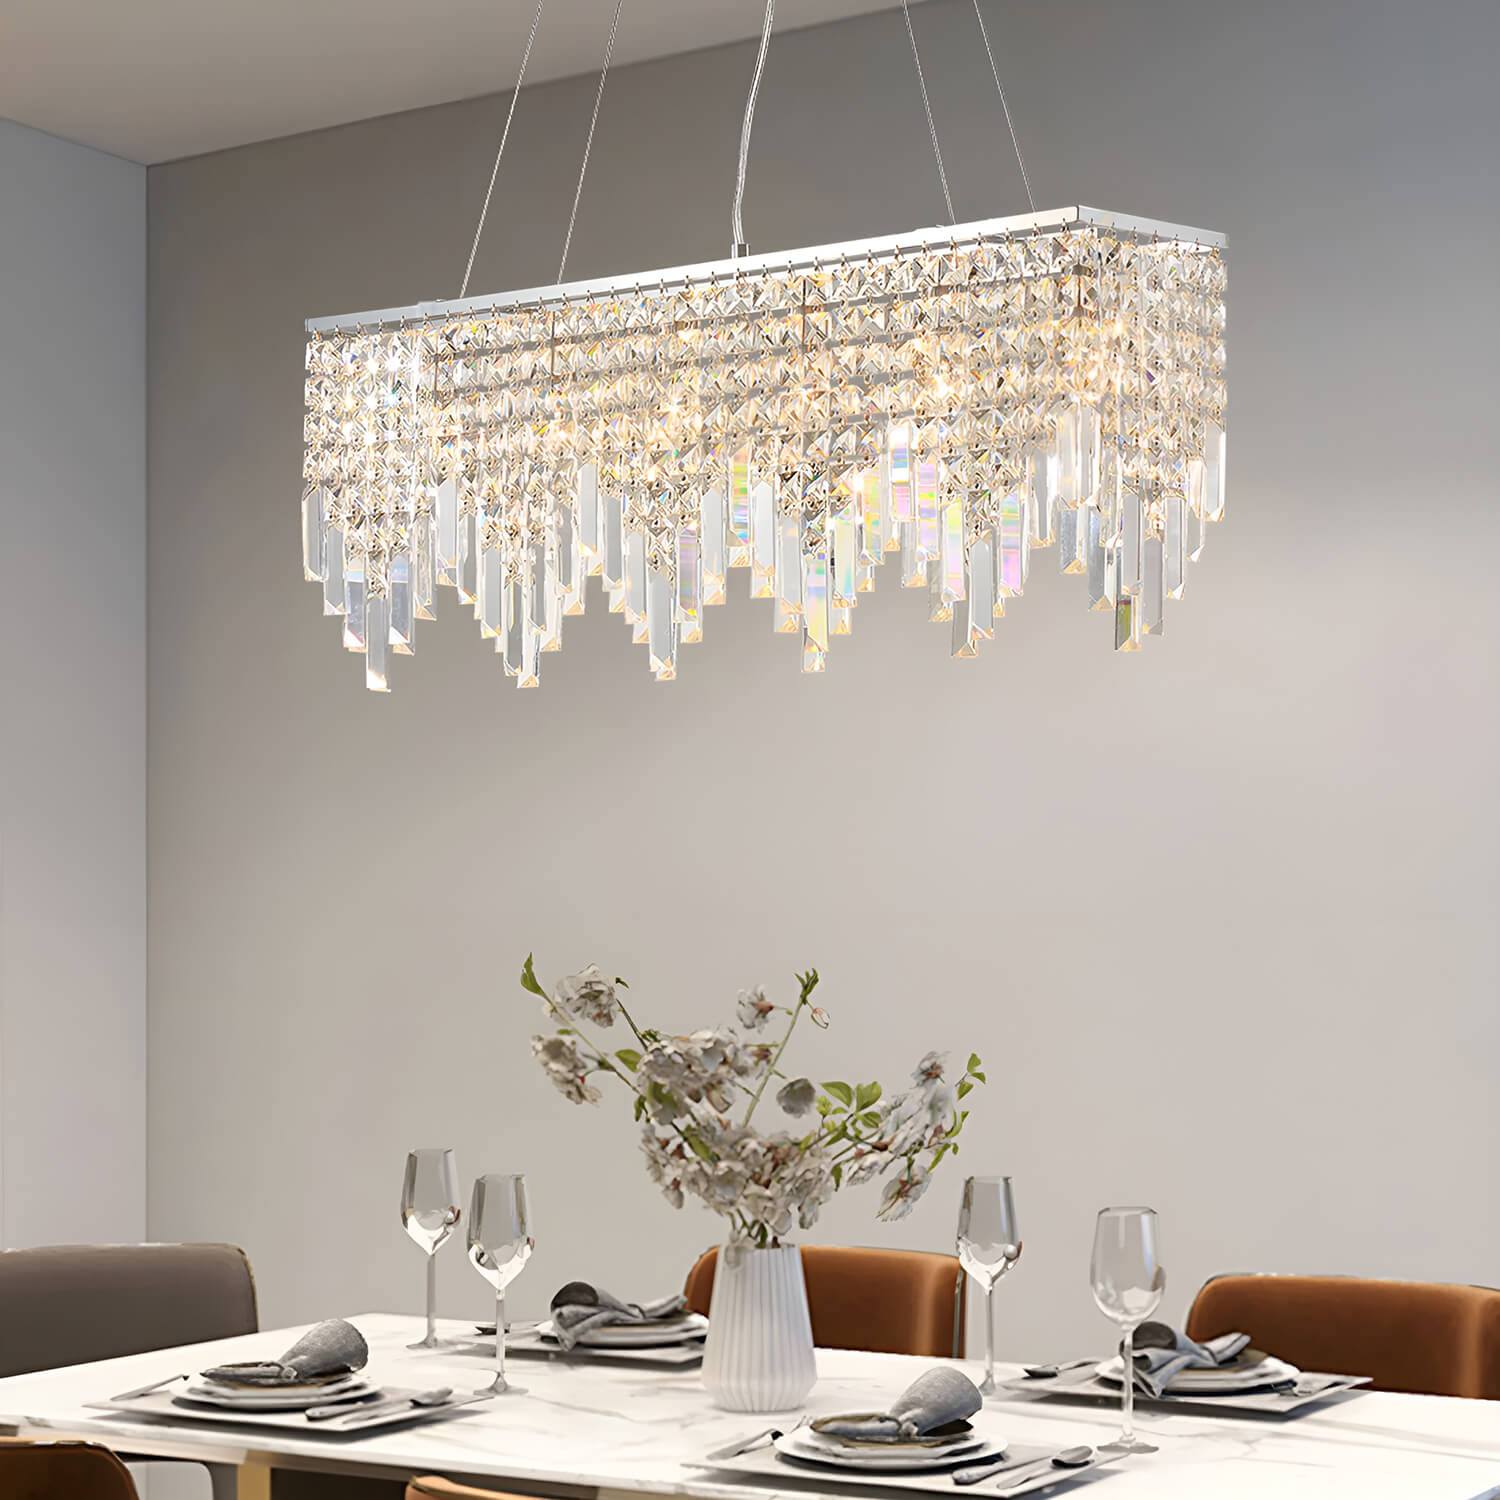 Rectangular Crystal Chandelier With Linear Design - Dining Room-3|Sofary